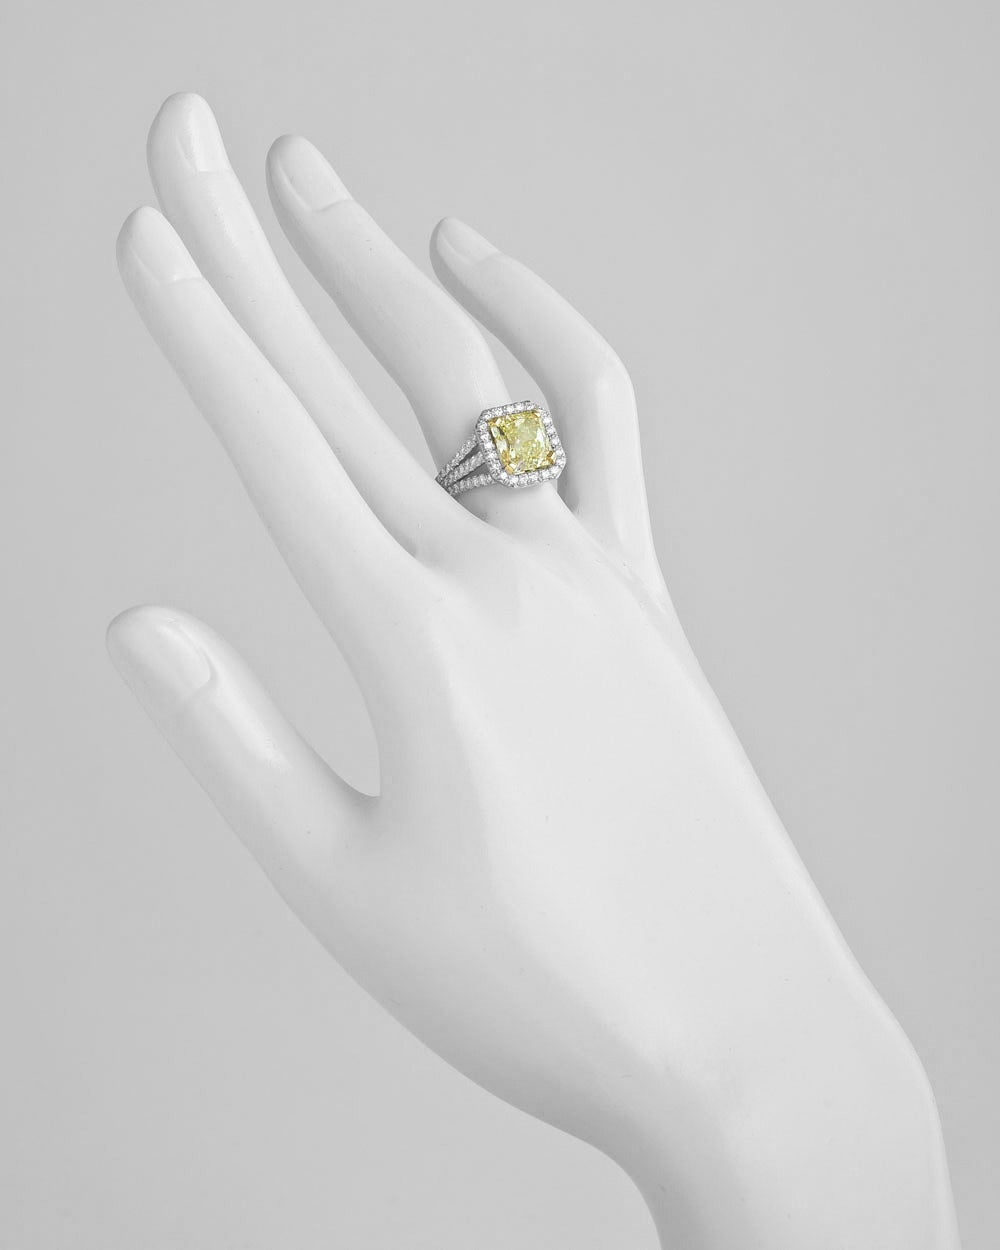 Diamond ring, centering on a natural radiant-cut fancy yellow diamond weighing 3.37 carats, with pavé diamond triple split shank mounting in platinum with an 18k yellow gold central basket. 88 round diamond accents weighing 0.84 total carats.